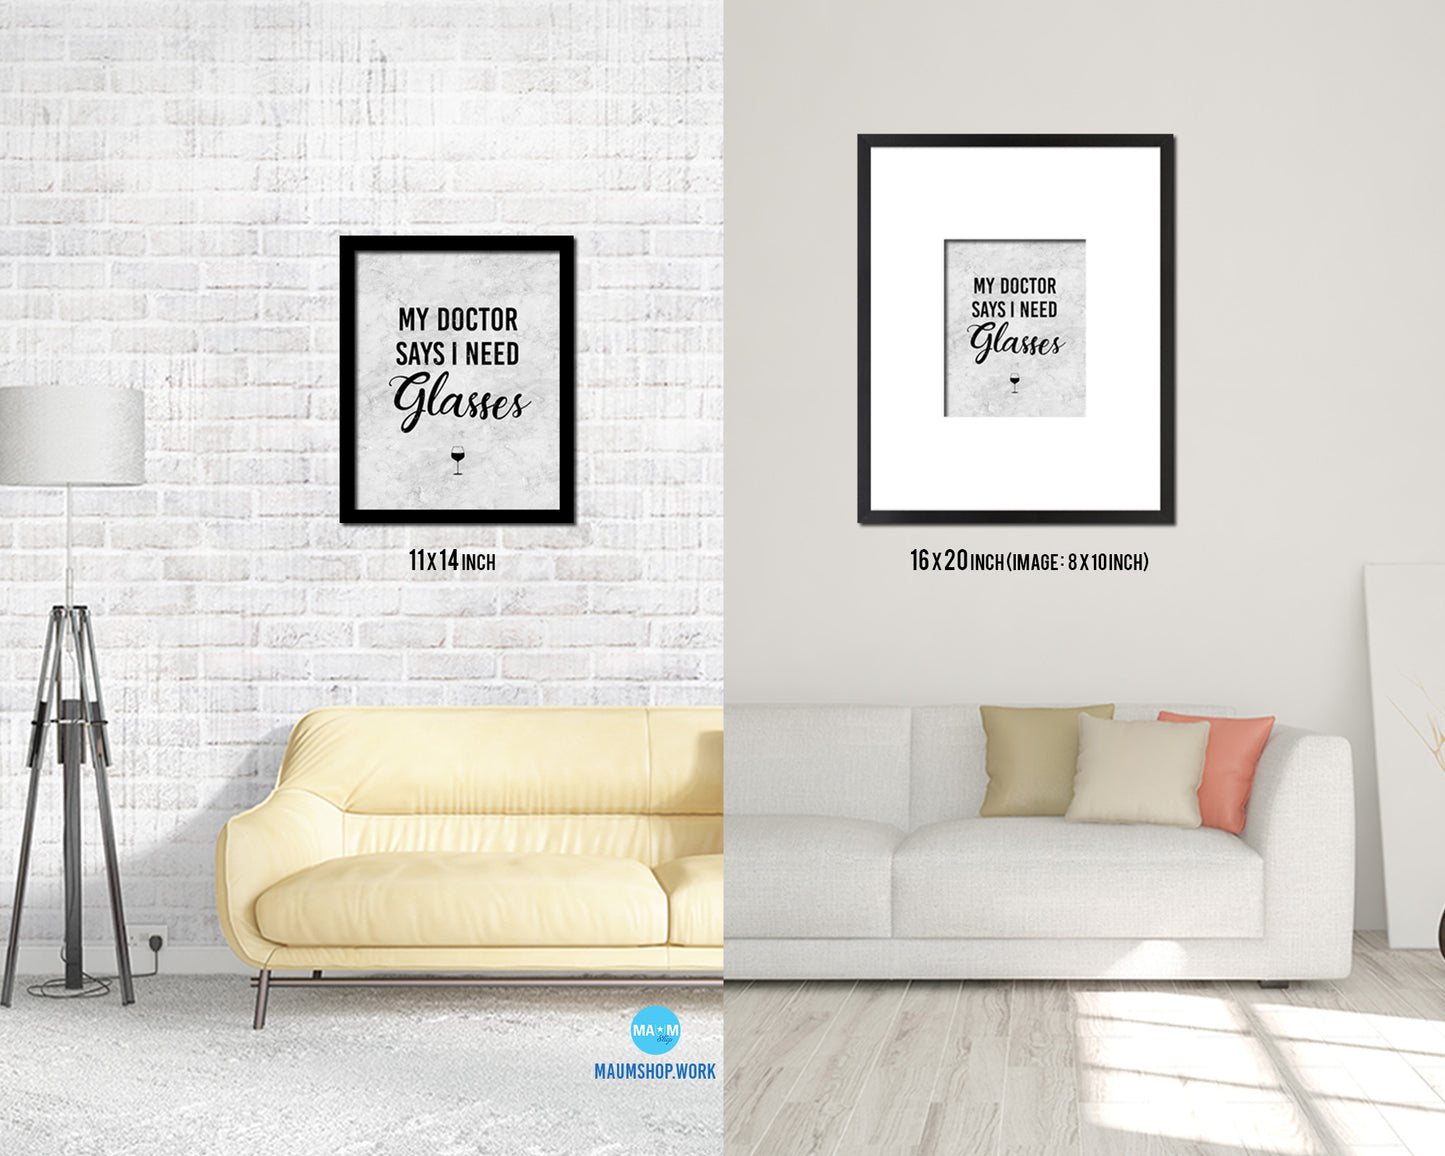 My doctor says I need glasses Quote Framed Print Wall Art Decor Gifts